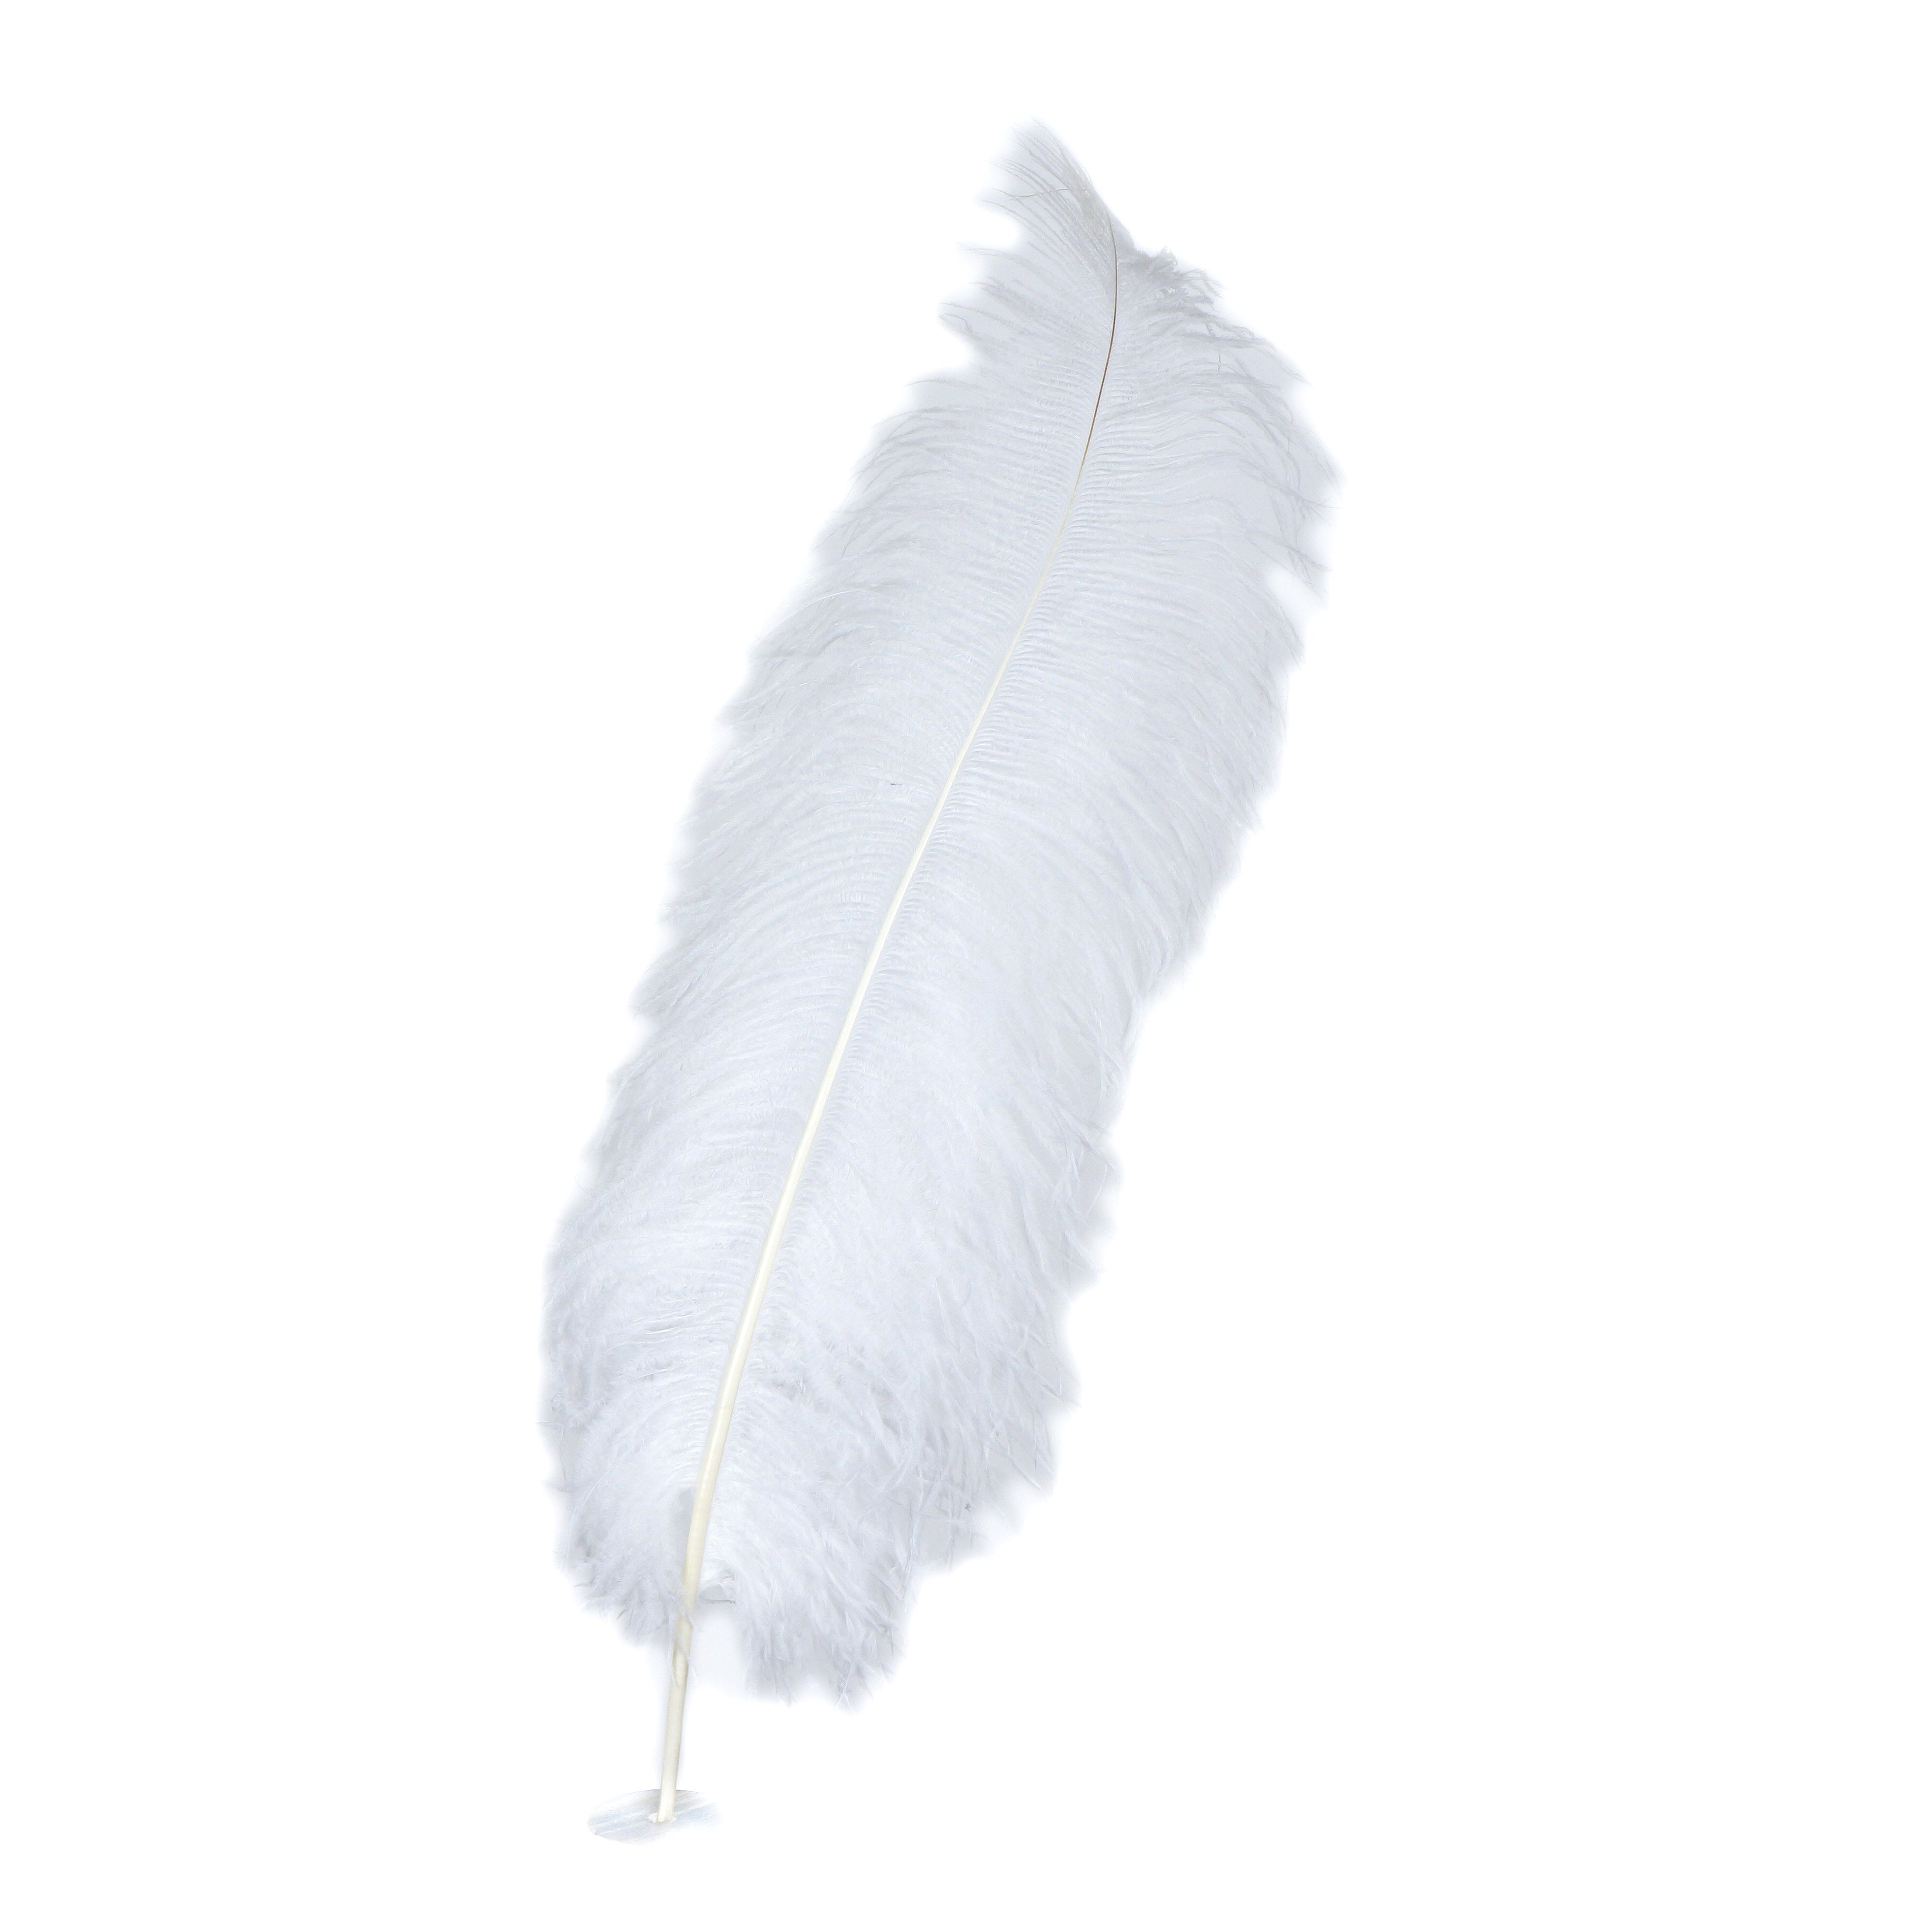 iHUFeather 10pcs White Ostrich Feathers Natural Bulk 14-16Inch 40